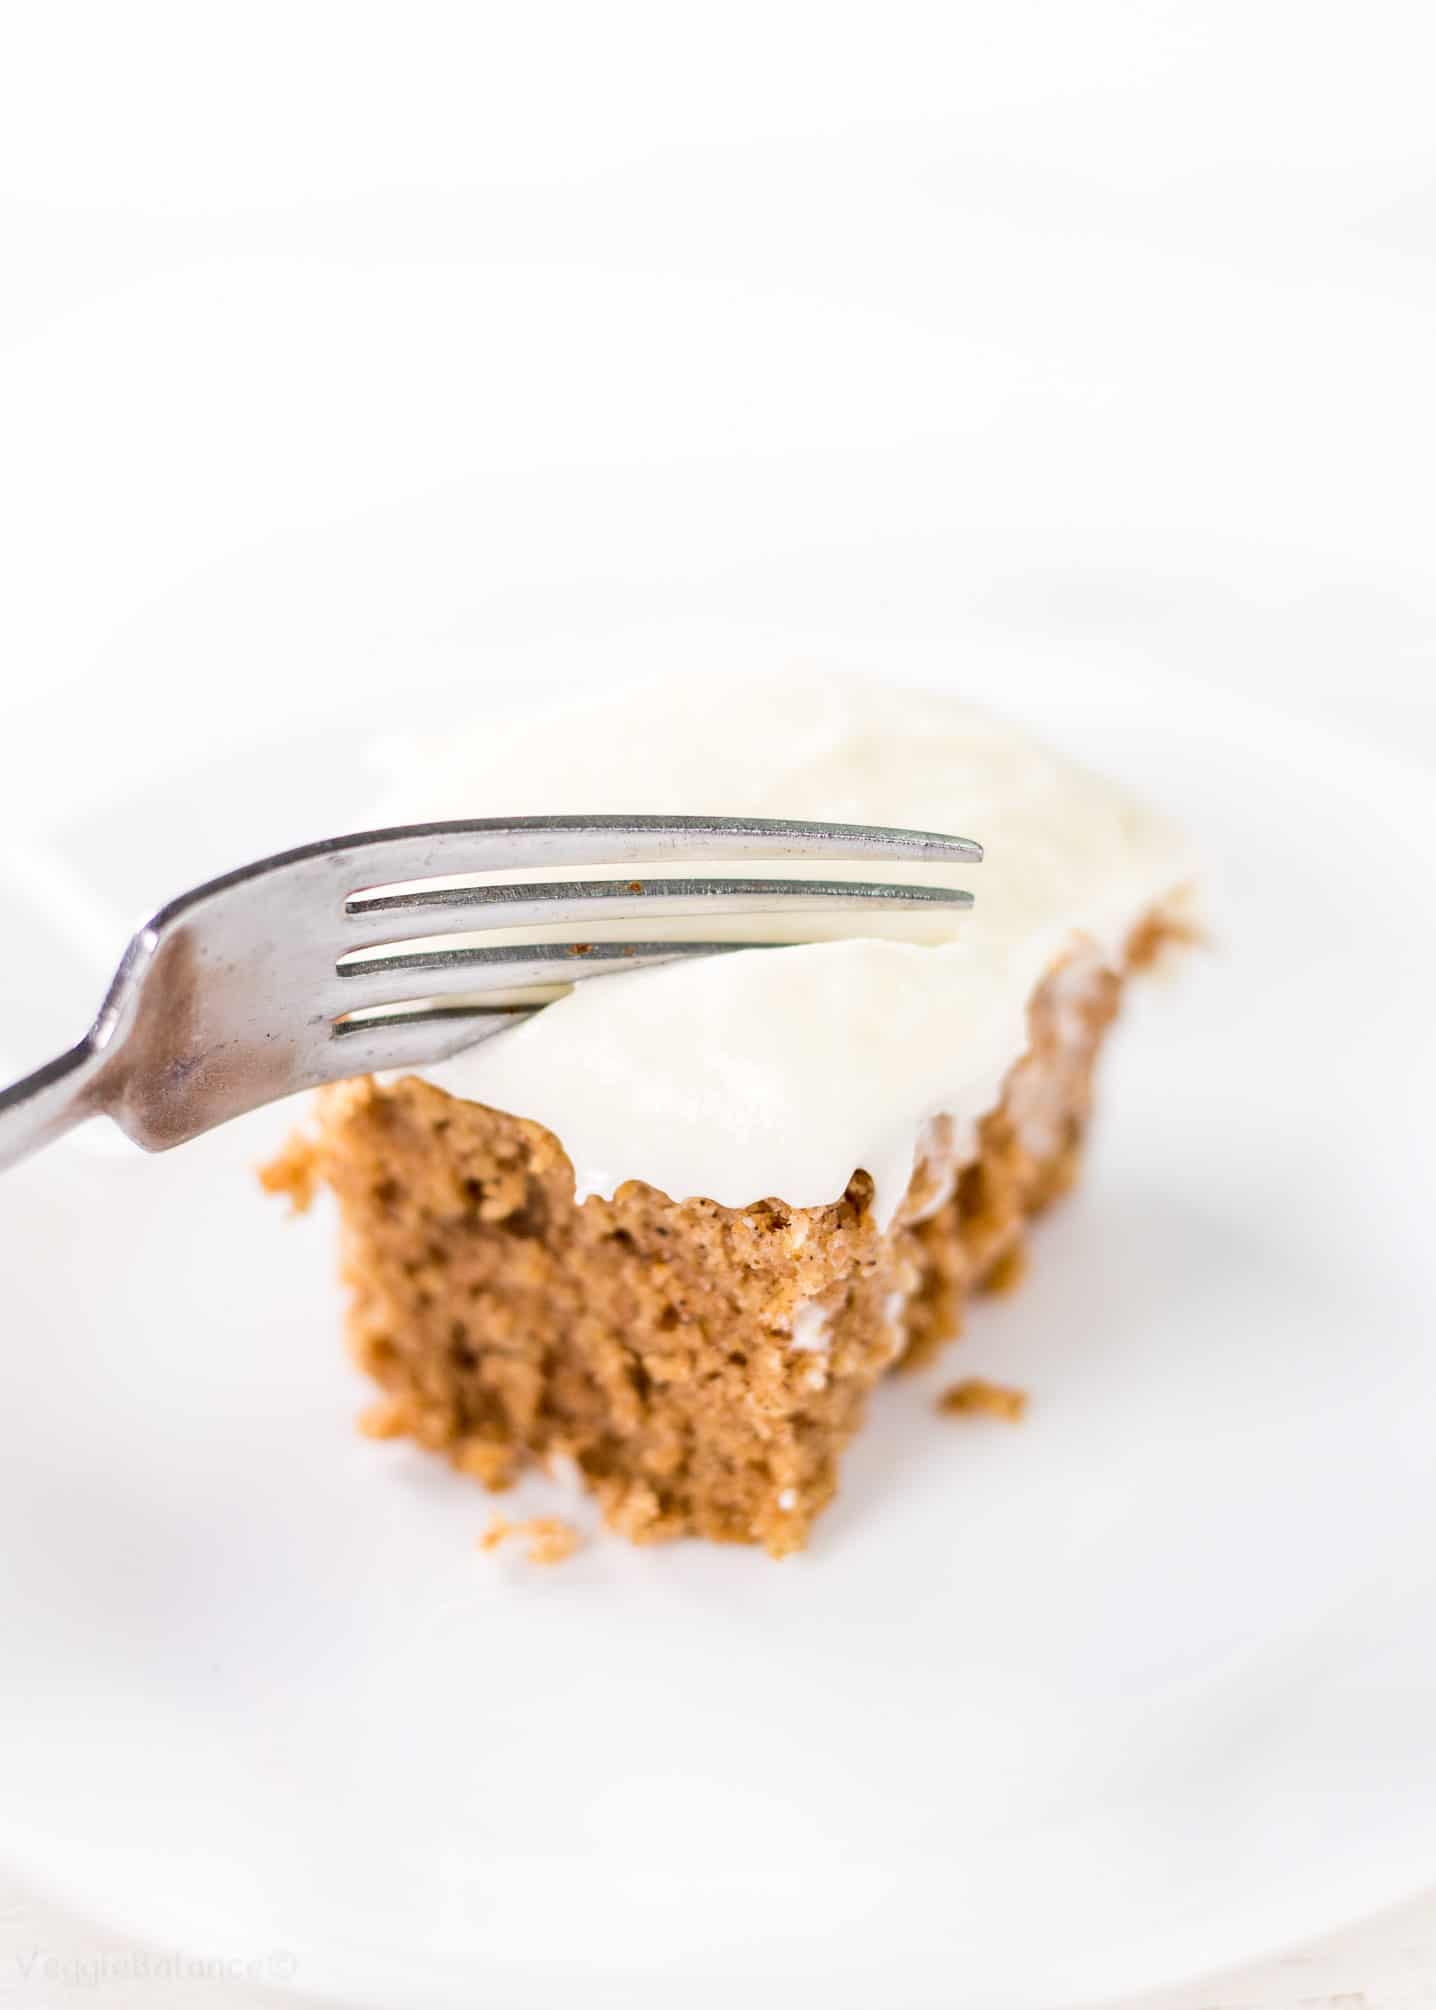 Applesauce Spice Cake with Cream Cheese Frosting Recipe